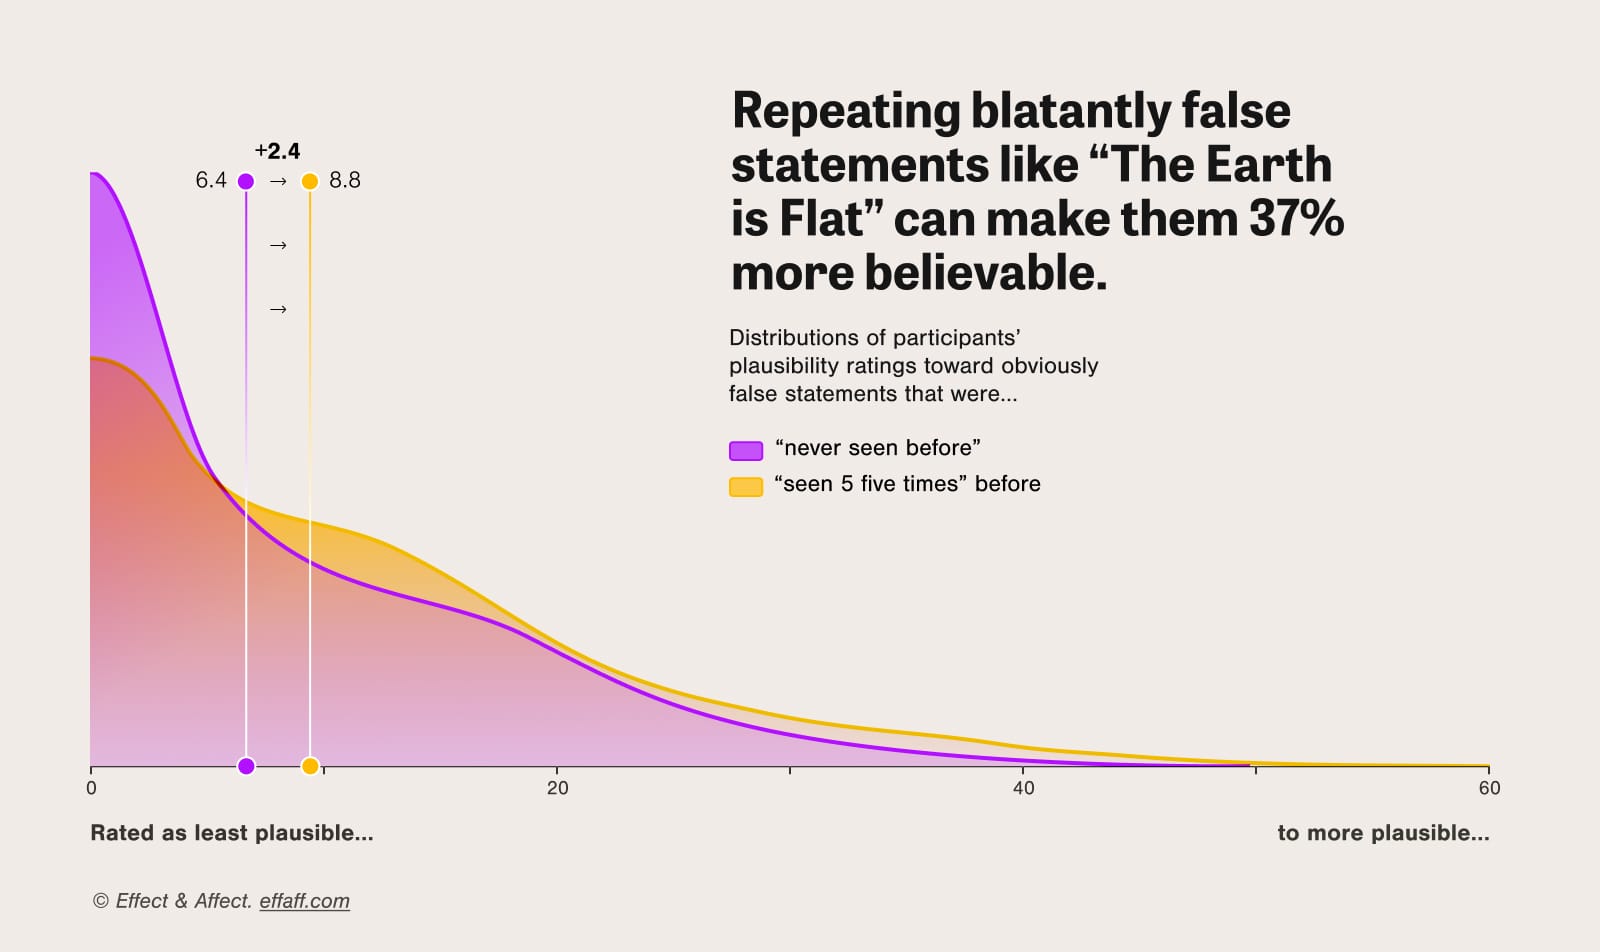 Area chart showing the distribution of participants plausibility ratings toward obviously false statements that were never seen before or seen 5 times before. Repeating the false statements 5 times made the false statements 37% more believable.